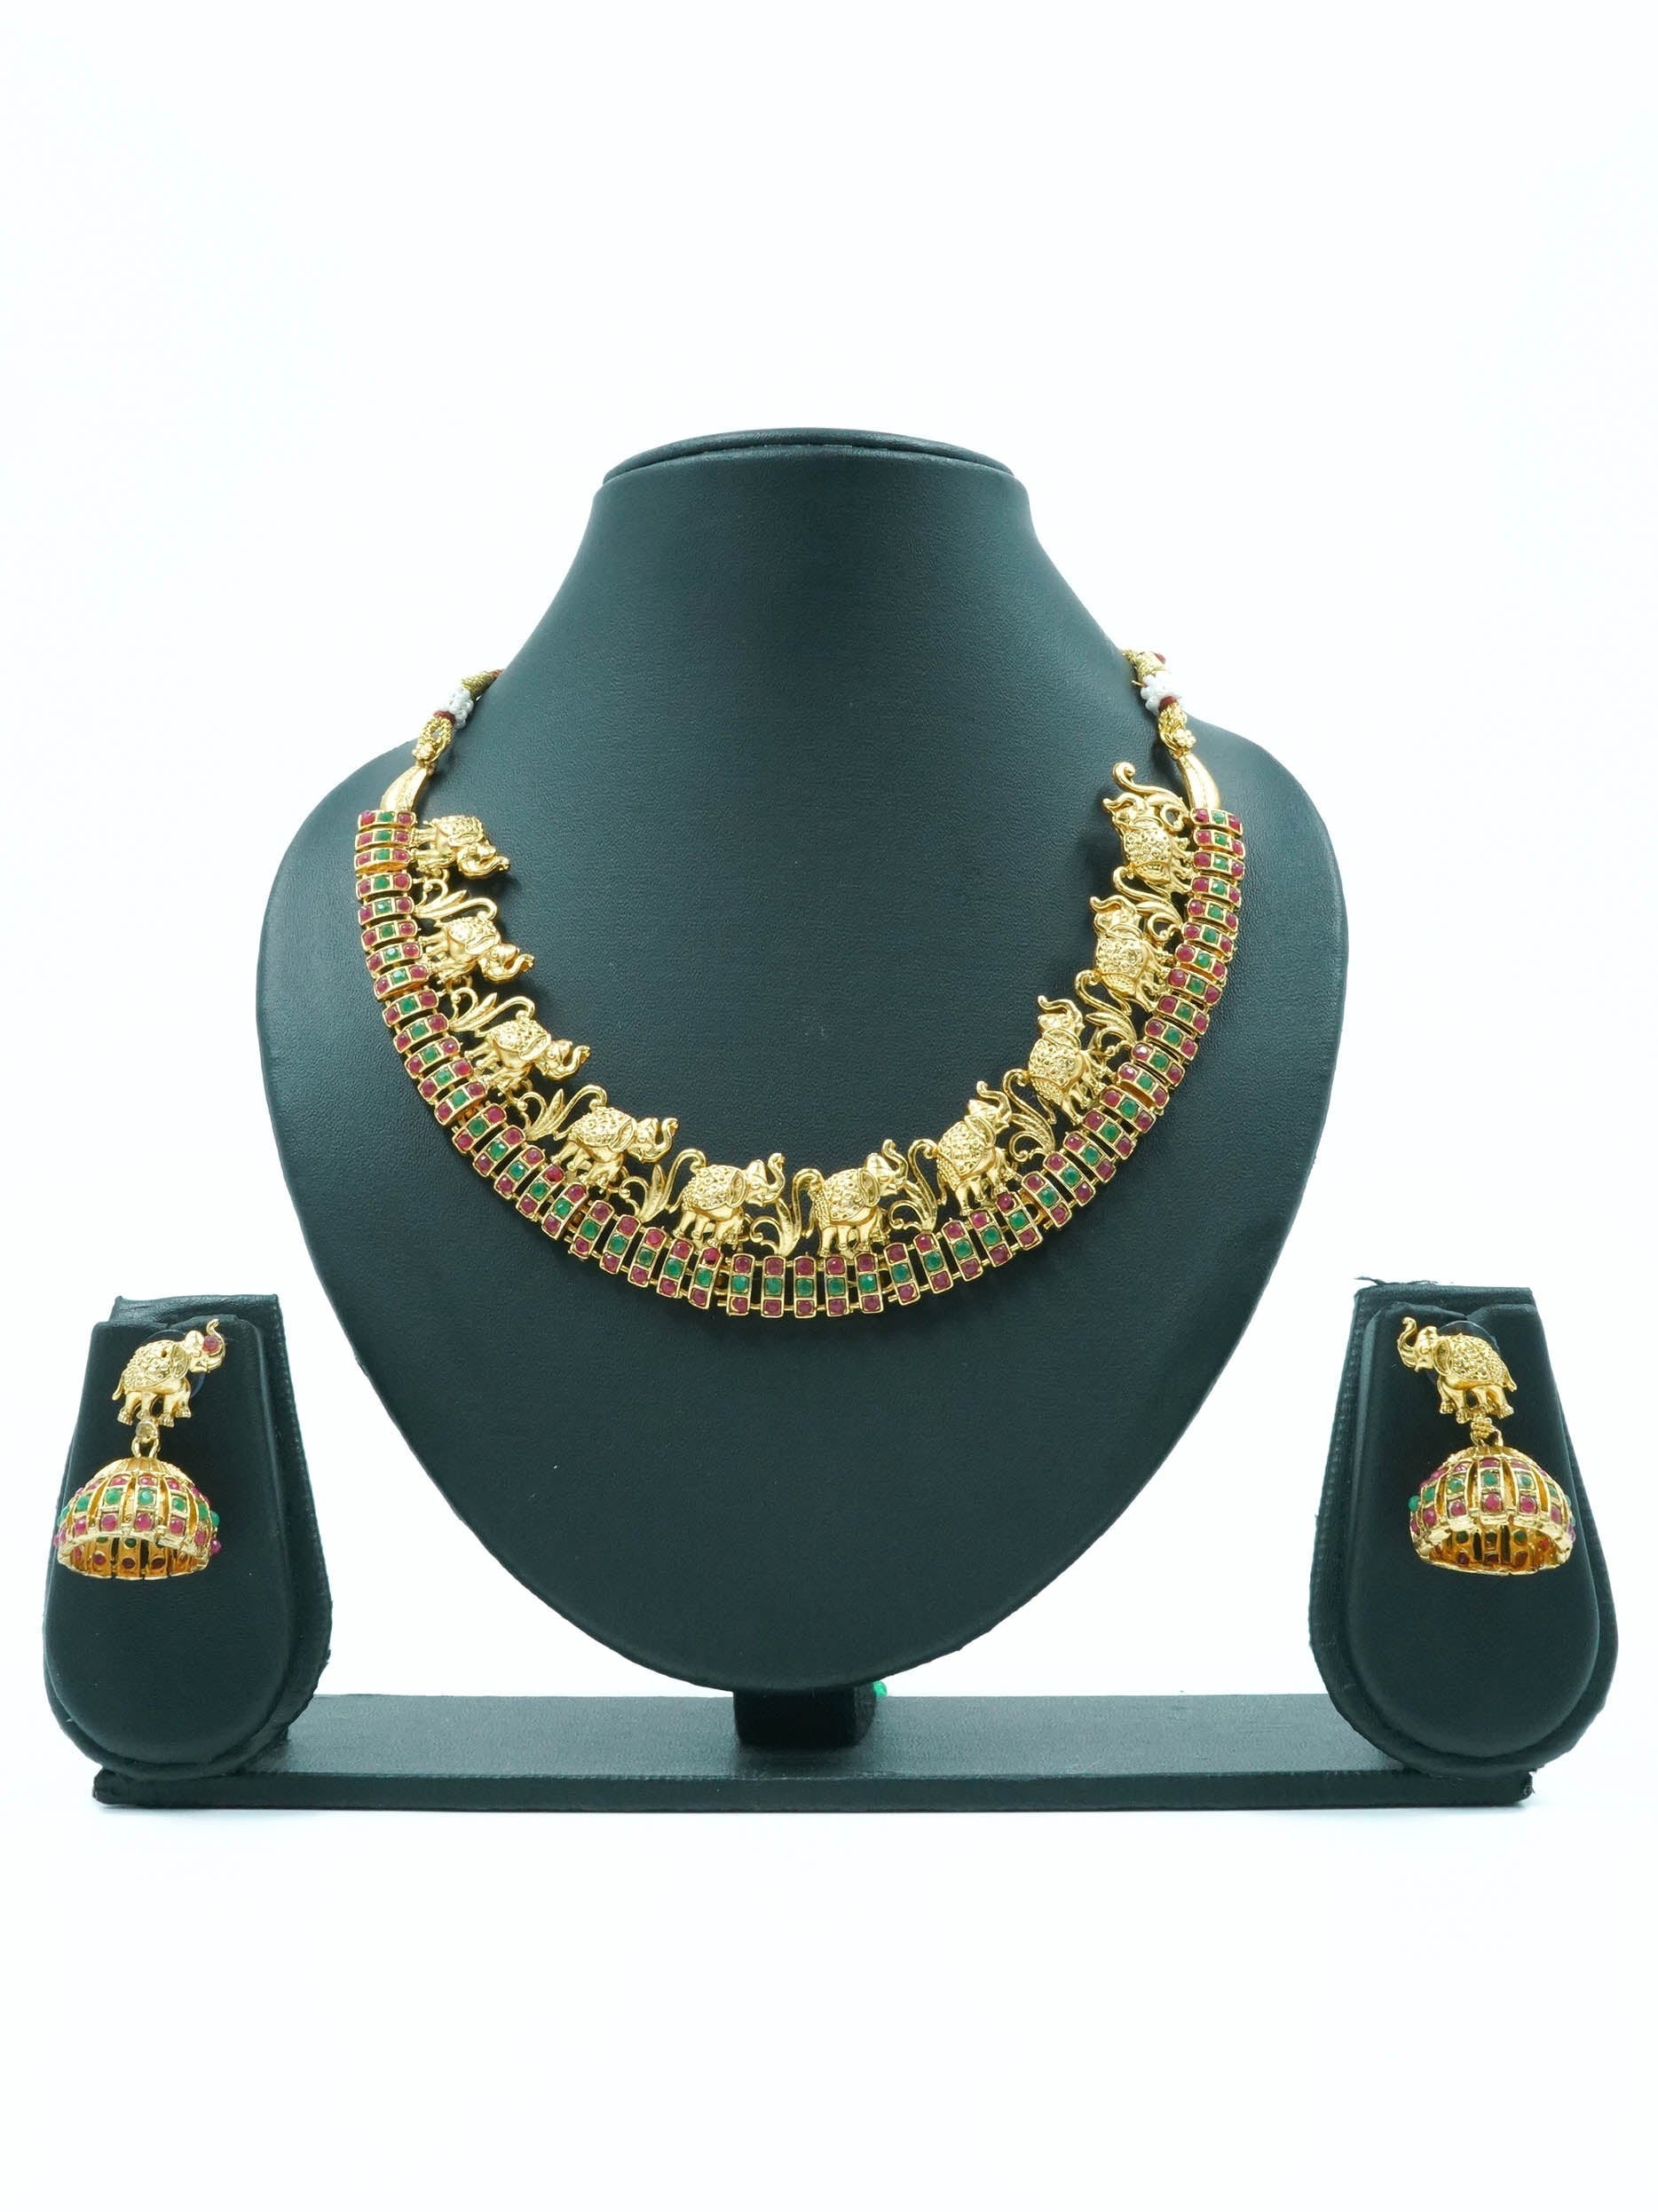 Premium Gold Finish Trending Necklace set with cz stones and Ruby emerald 6557N